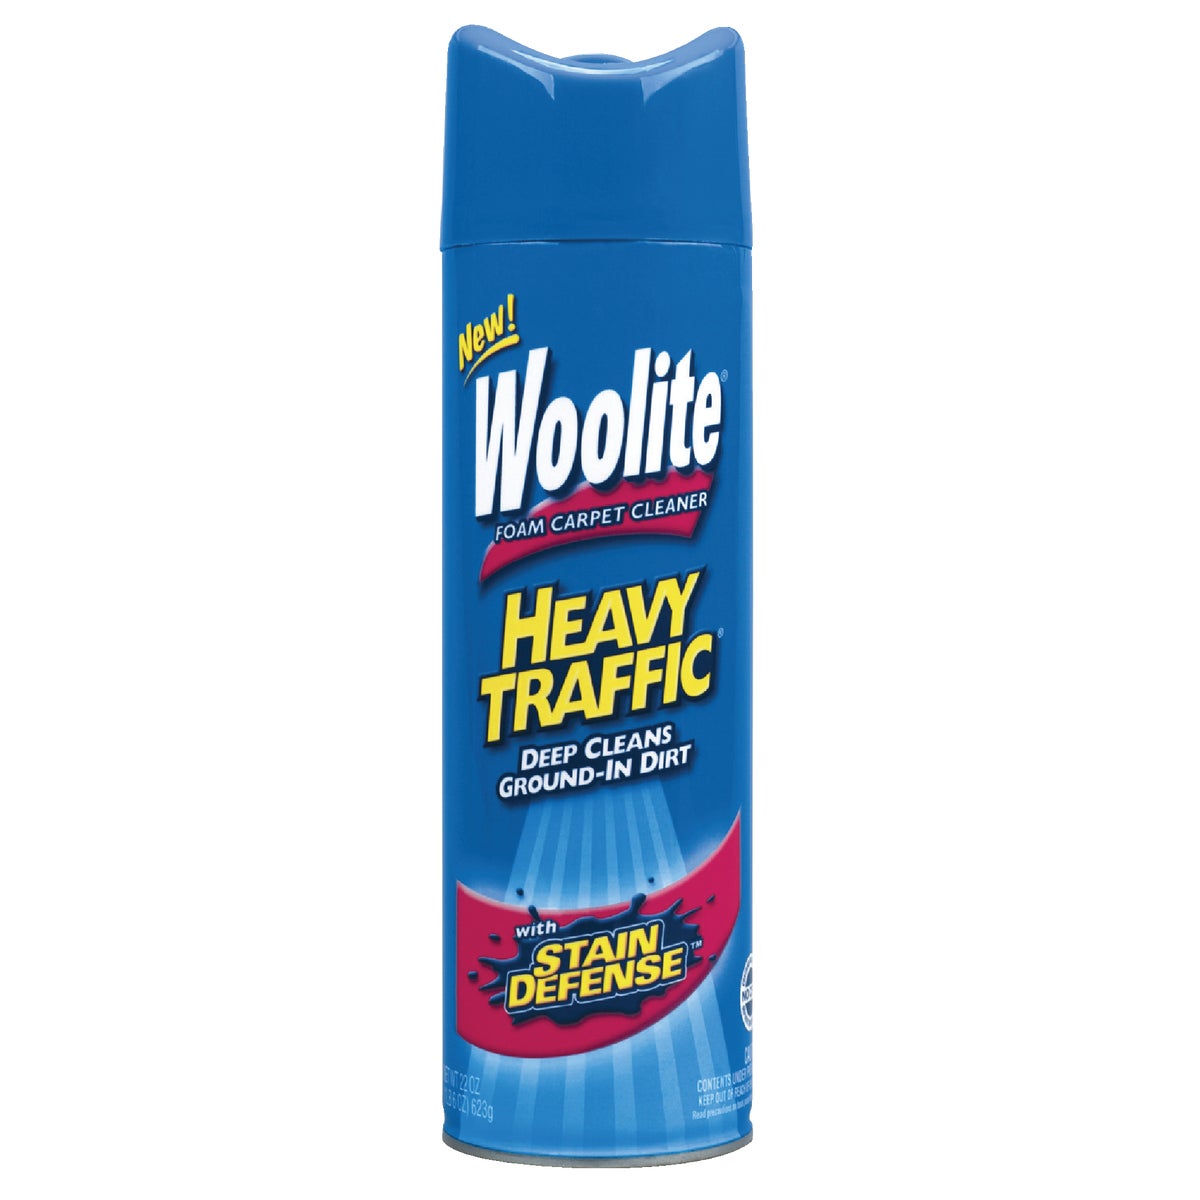 Item 624676, Heavy Traffic foam with Stain Defense .